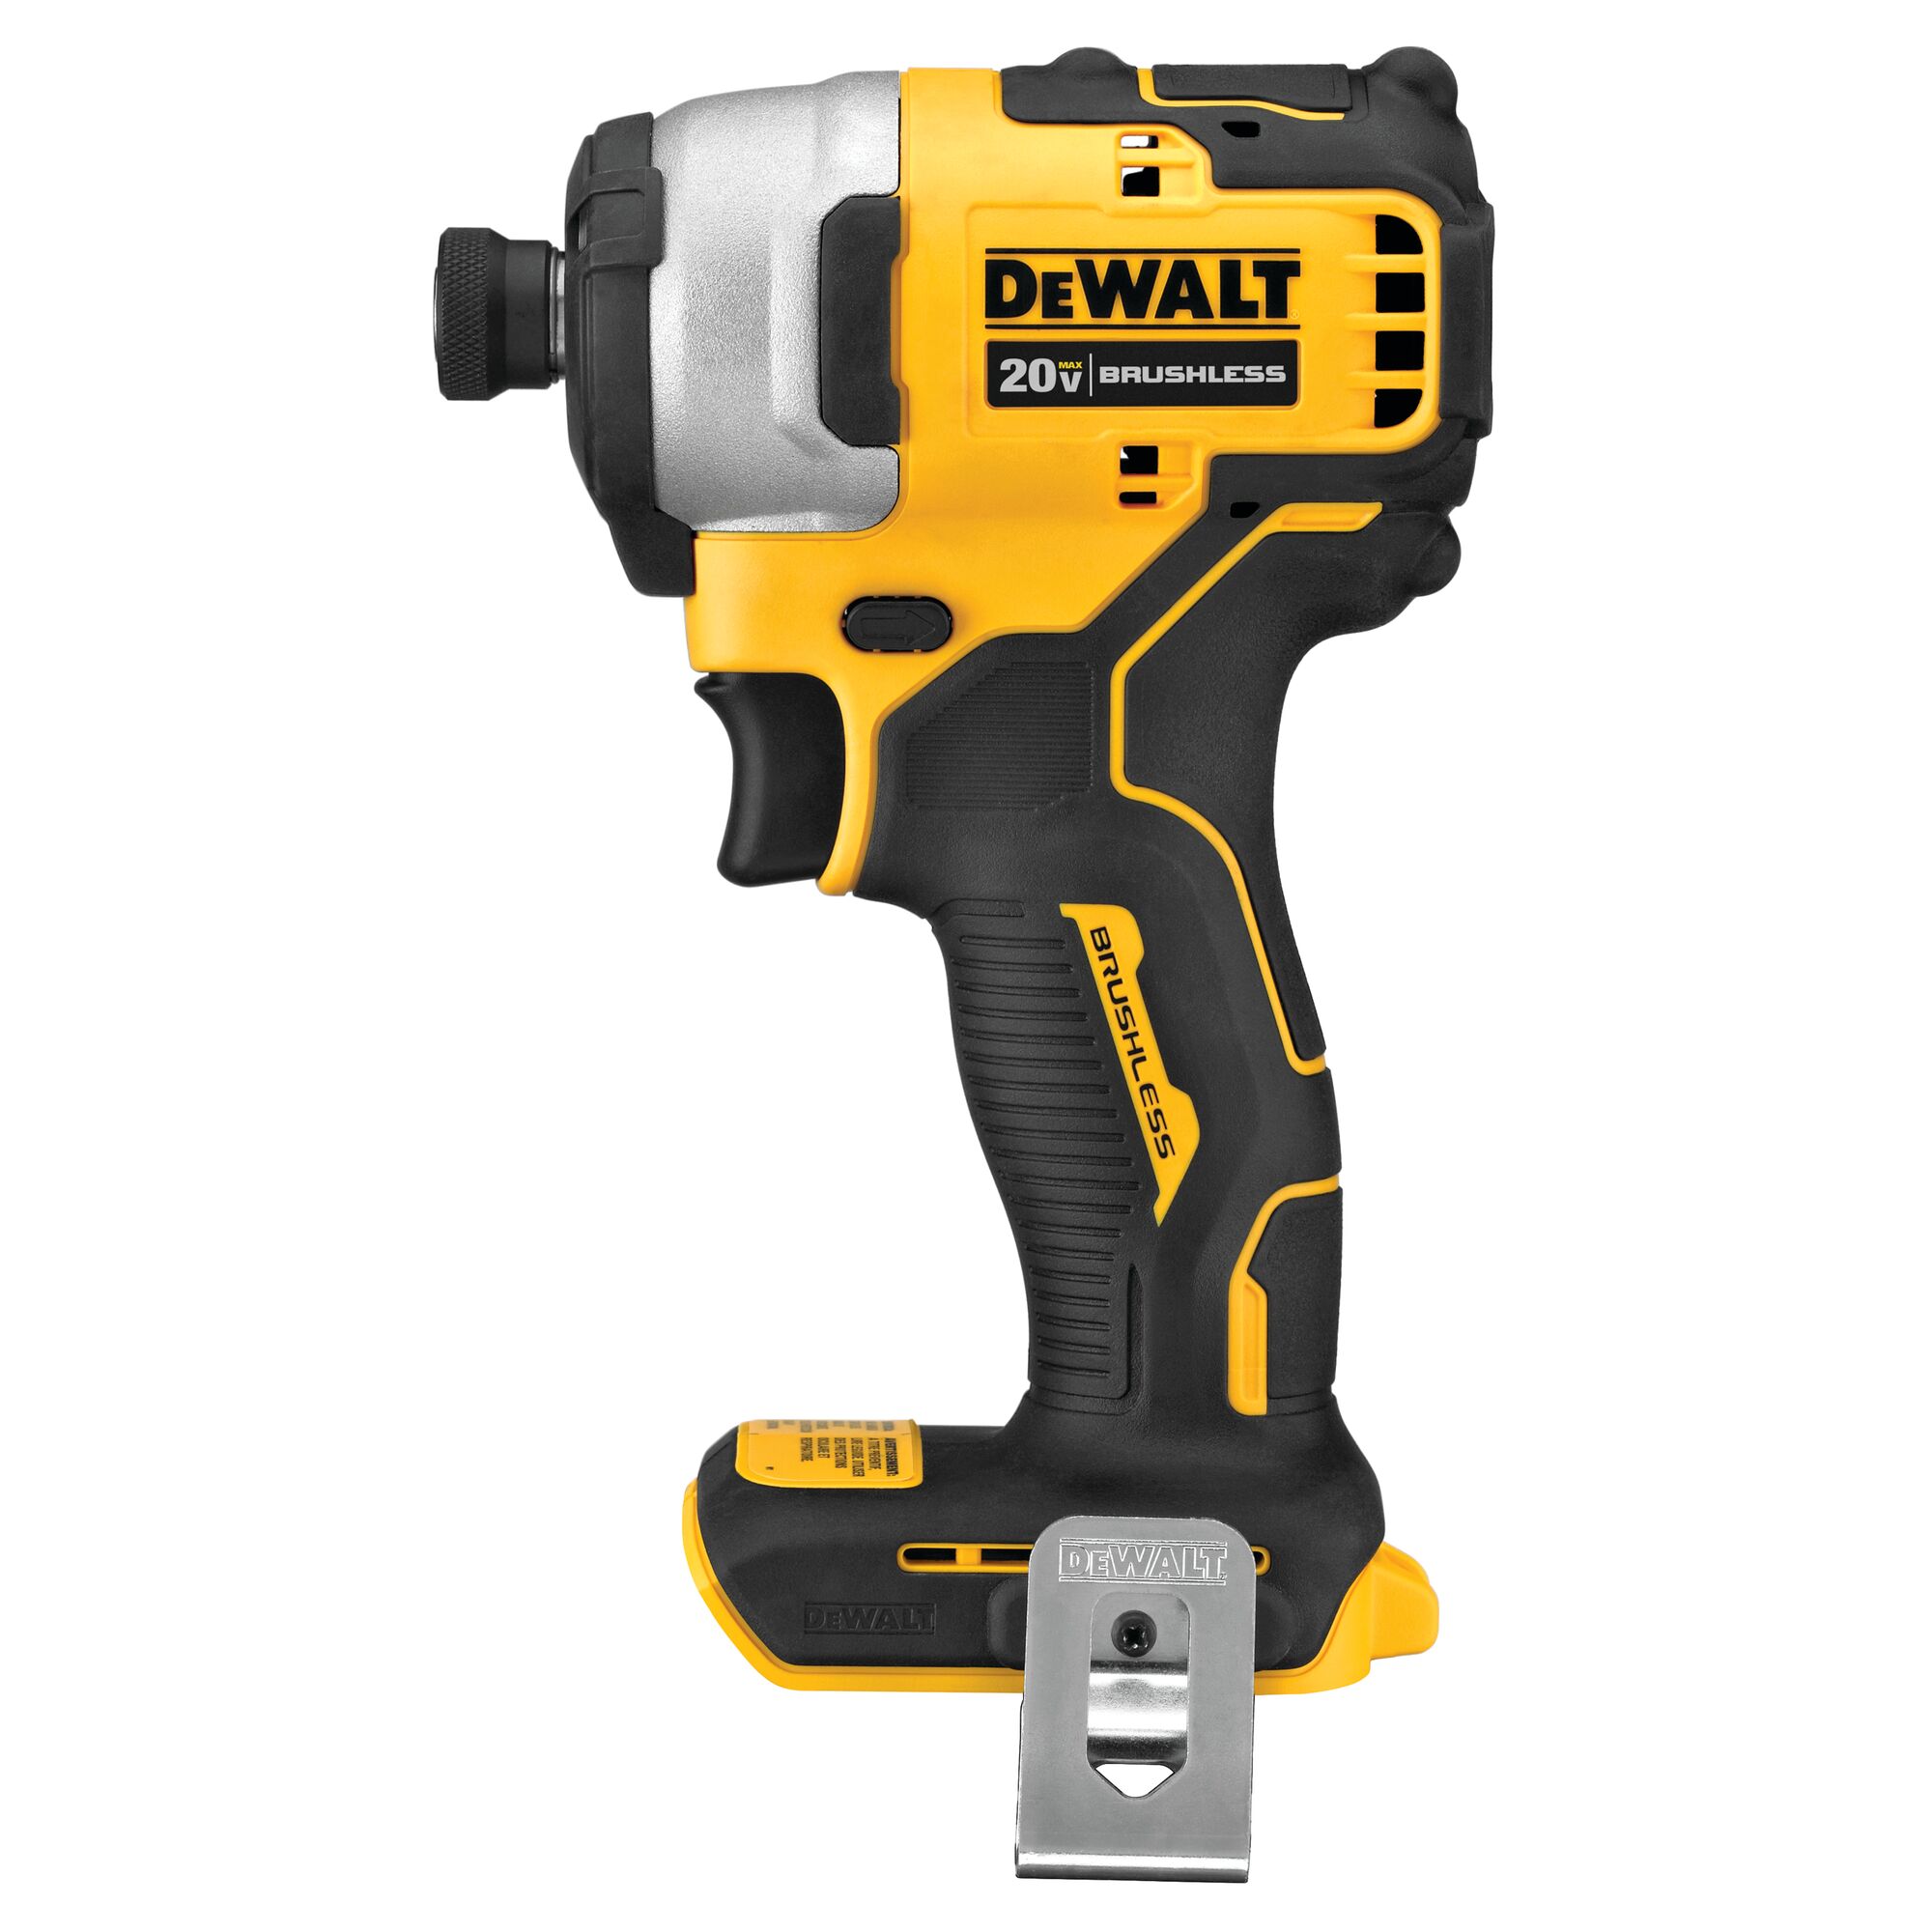 ATOMIC 20V MAX* Brushless Cordless Compact 1/4 in. Impact Driver 